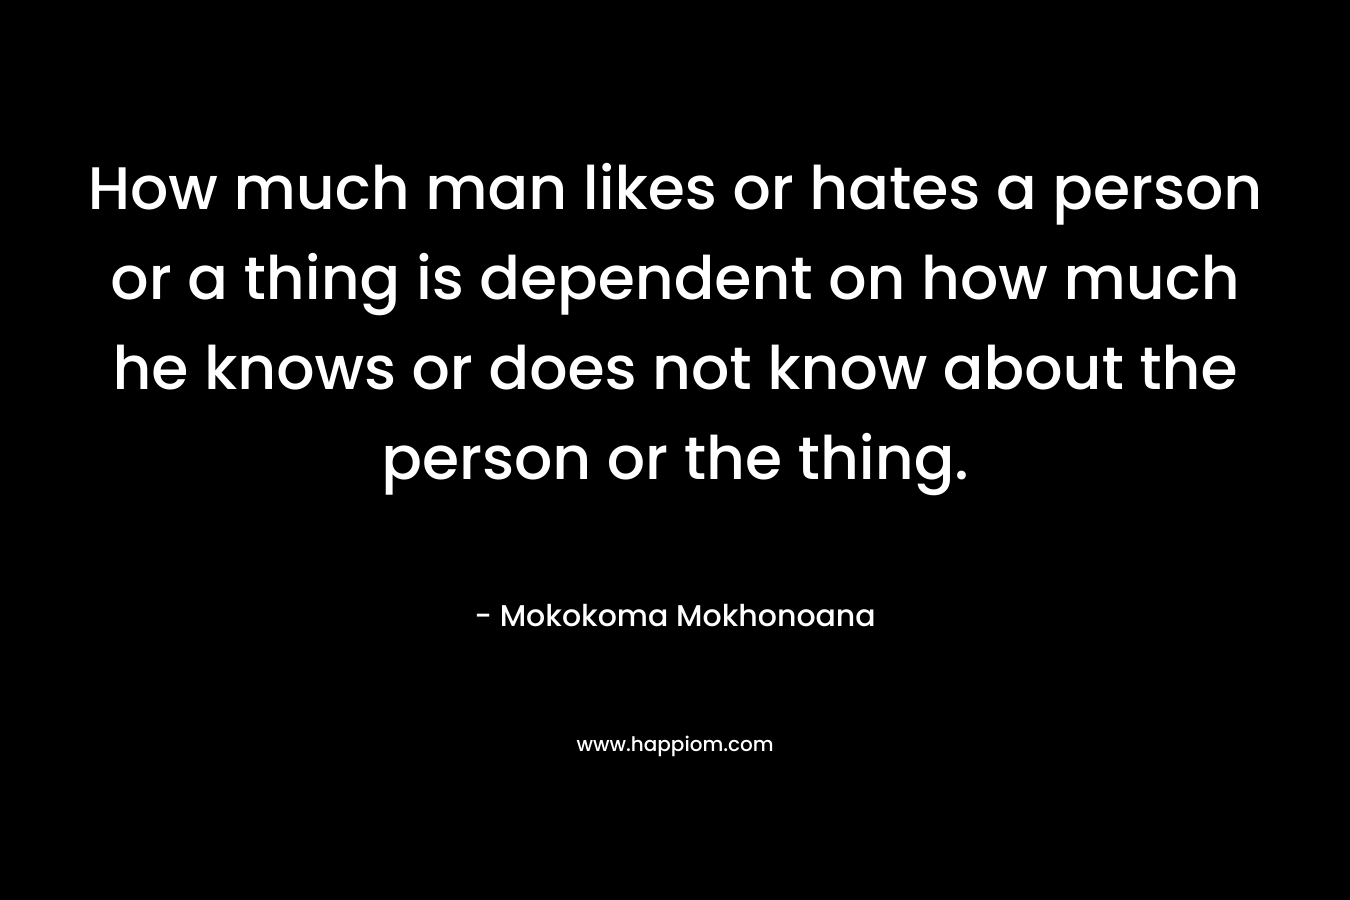 How much man likes or hates a person or a thing is dependent on how much he knows or does not know about the person or the thing.